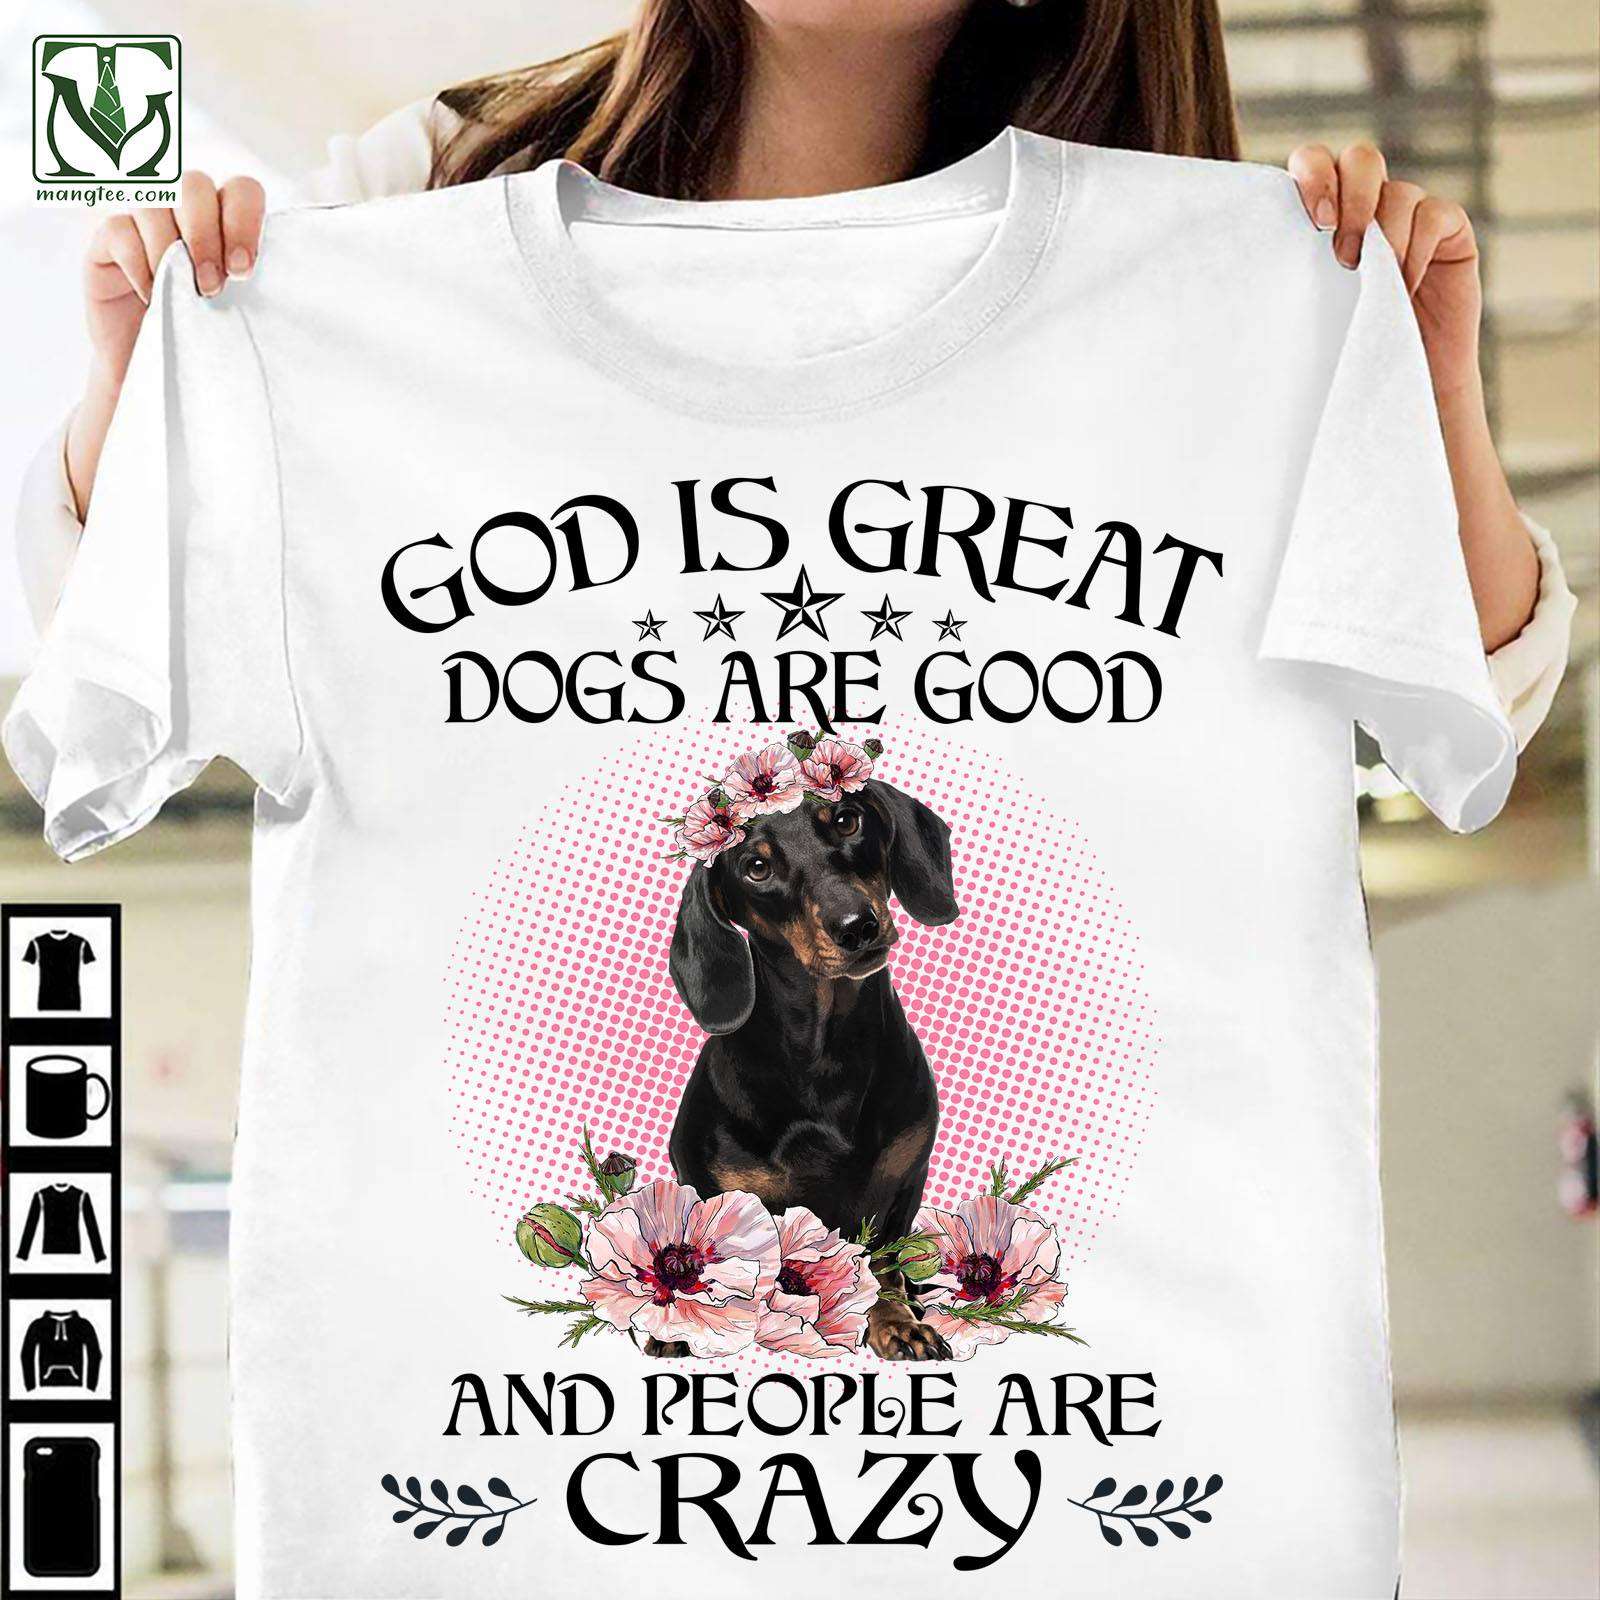 Dachshund Flower - God is great dogs are good and people are crazy